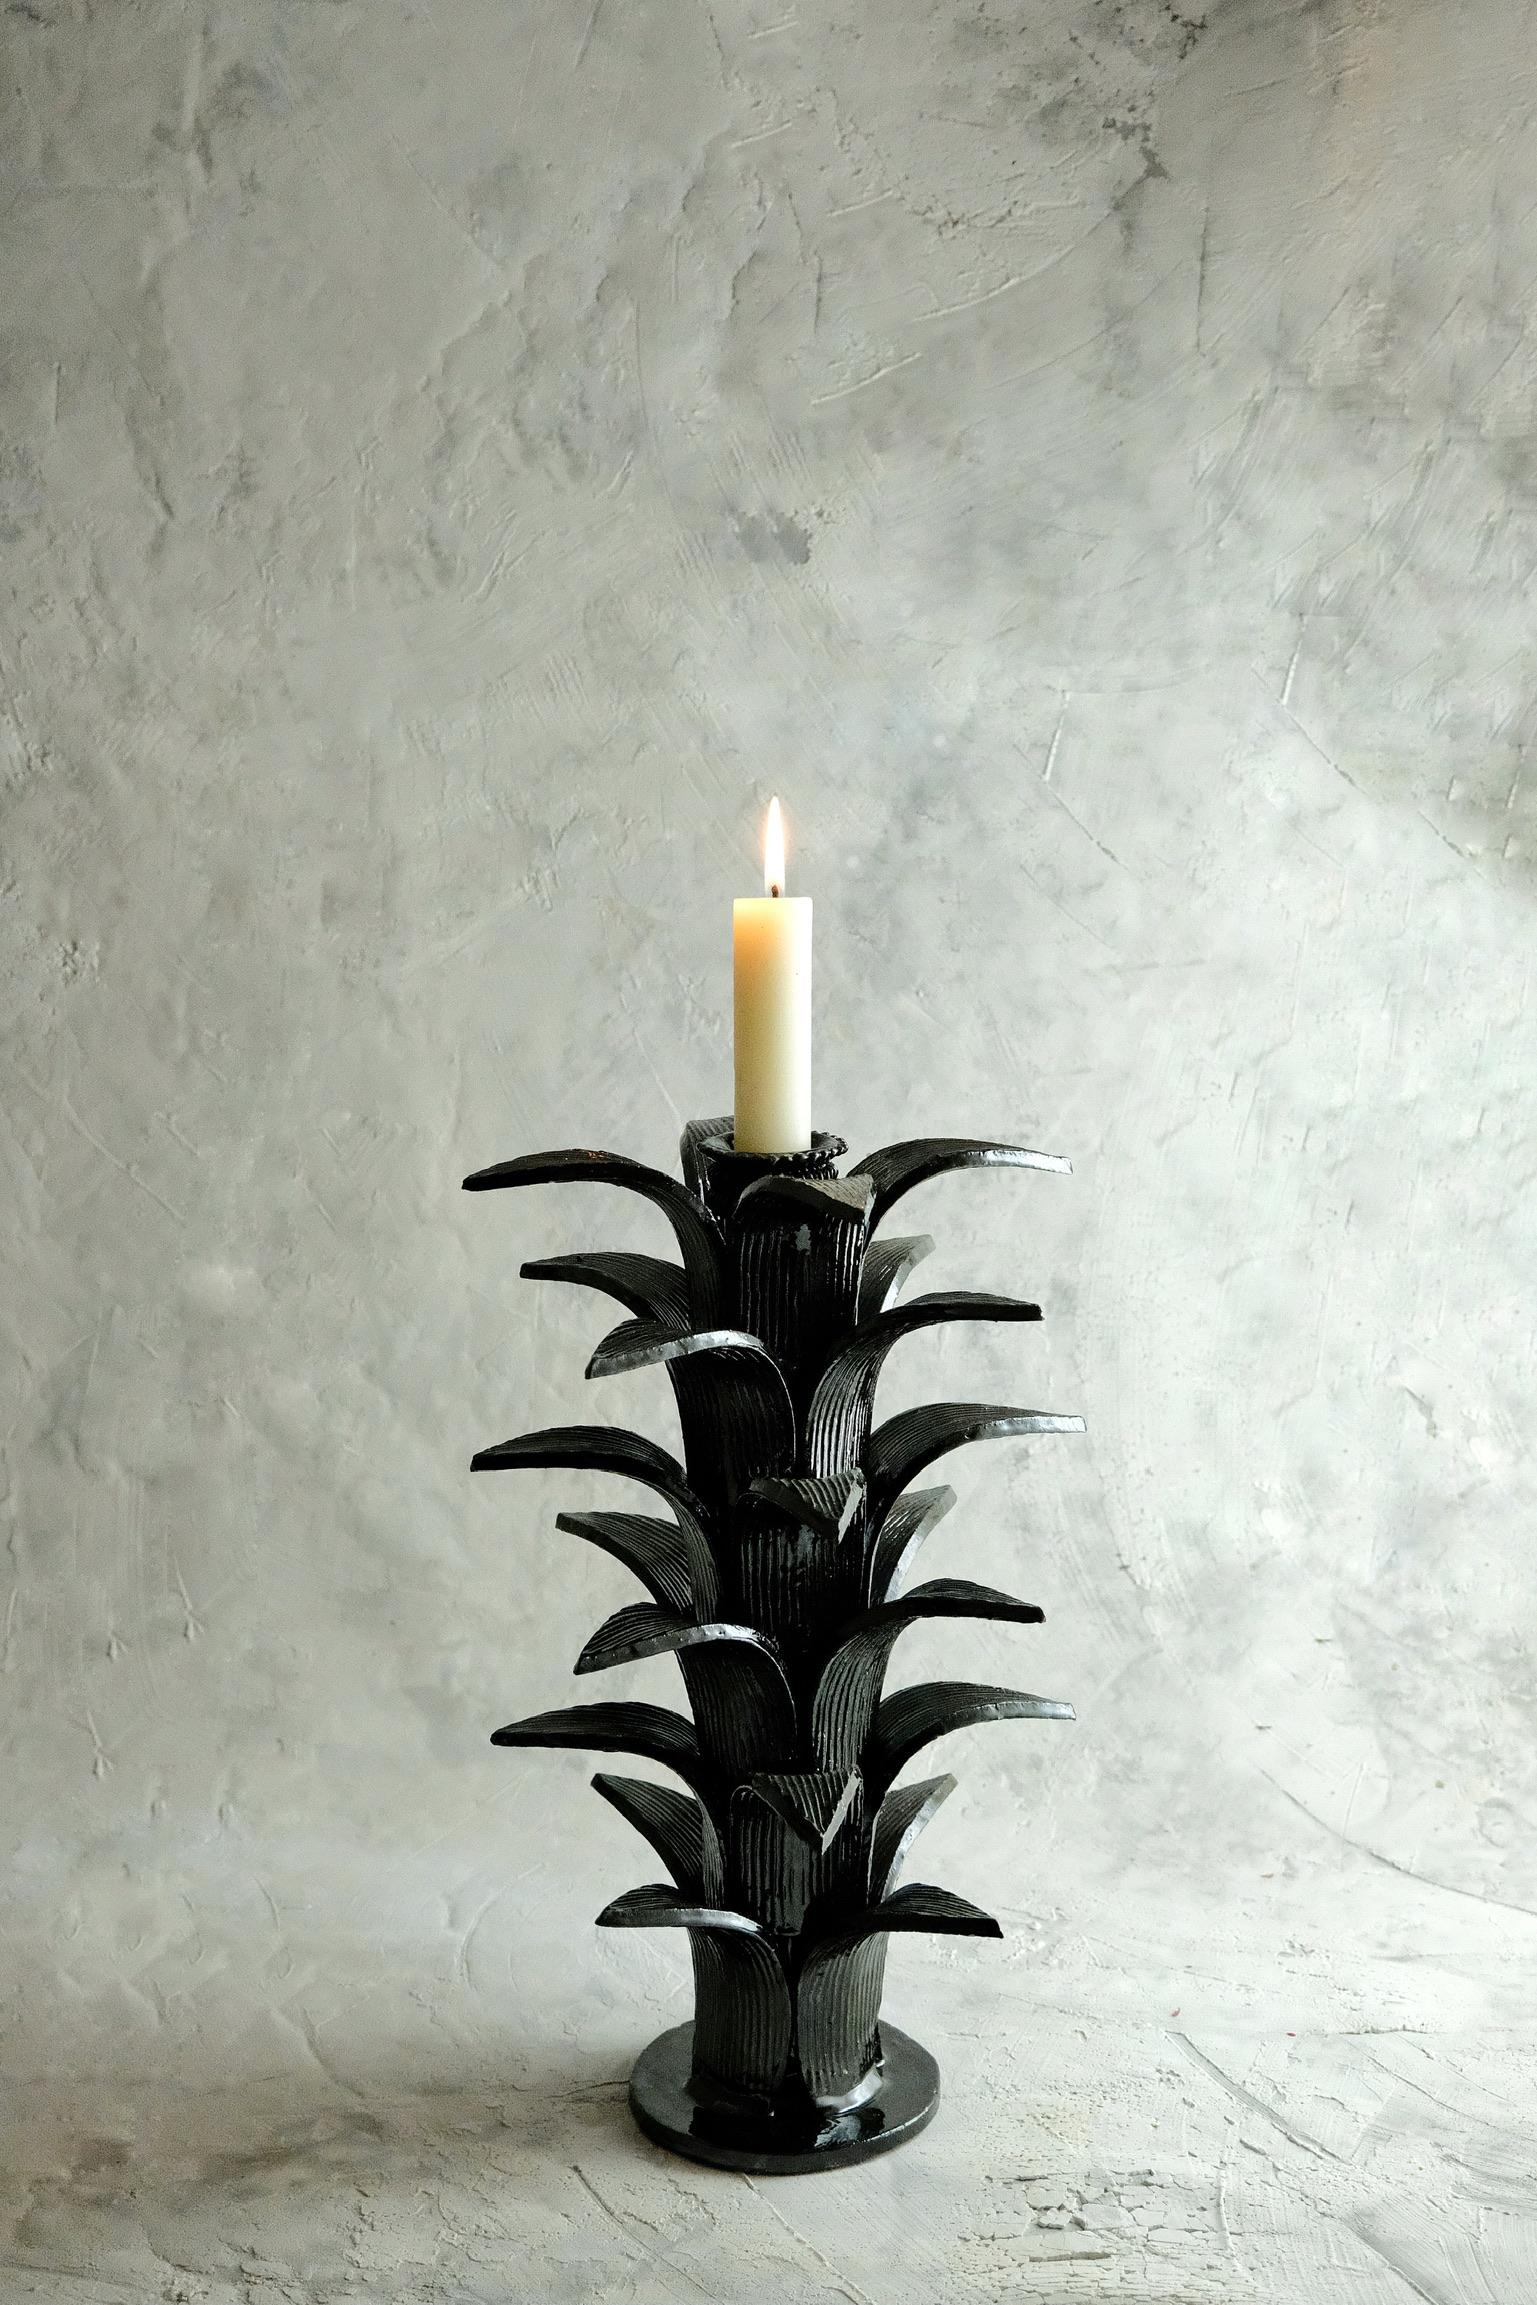 Sorgo Candleholder by Onora
Dimensions: D 23 x H 38 cm
Materials: Clay, Quartz stone

Available in black, green, blue and yellow. 
Hand made in the town of San Jose de Gracia, Michoacan, Once the piece has been completely molded, a white based